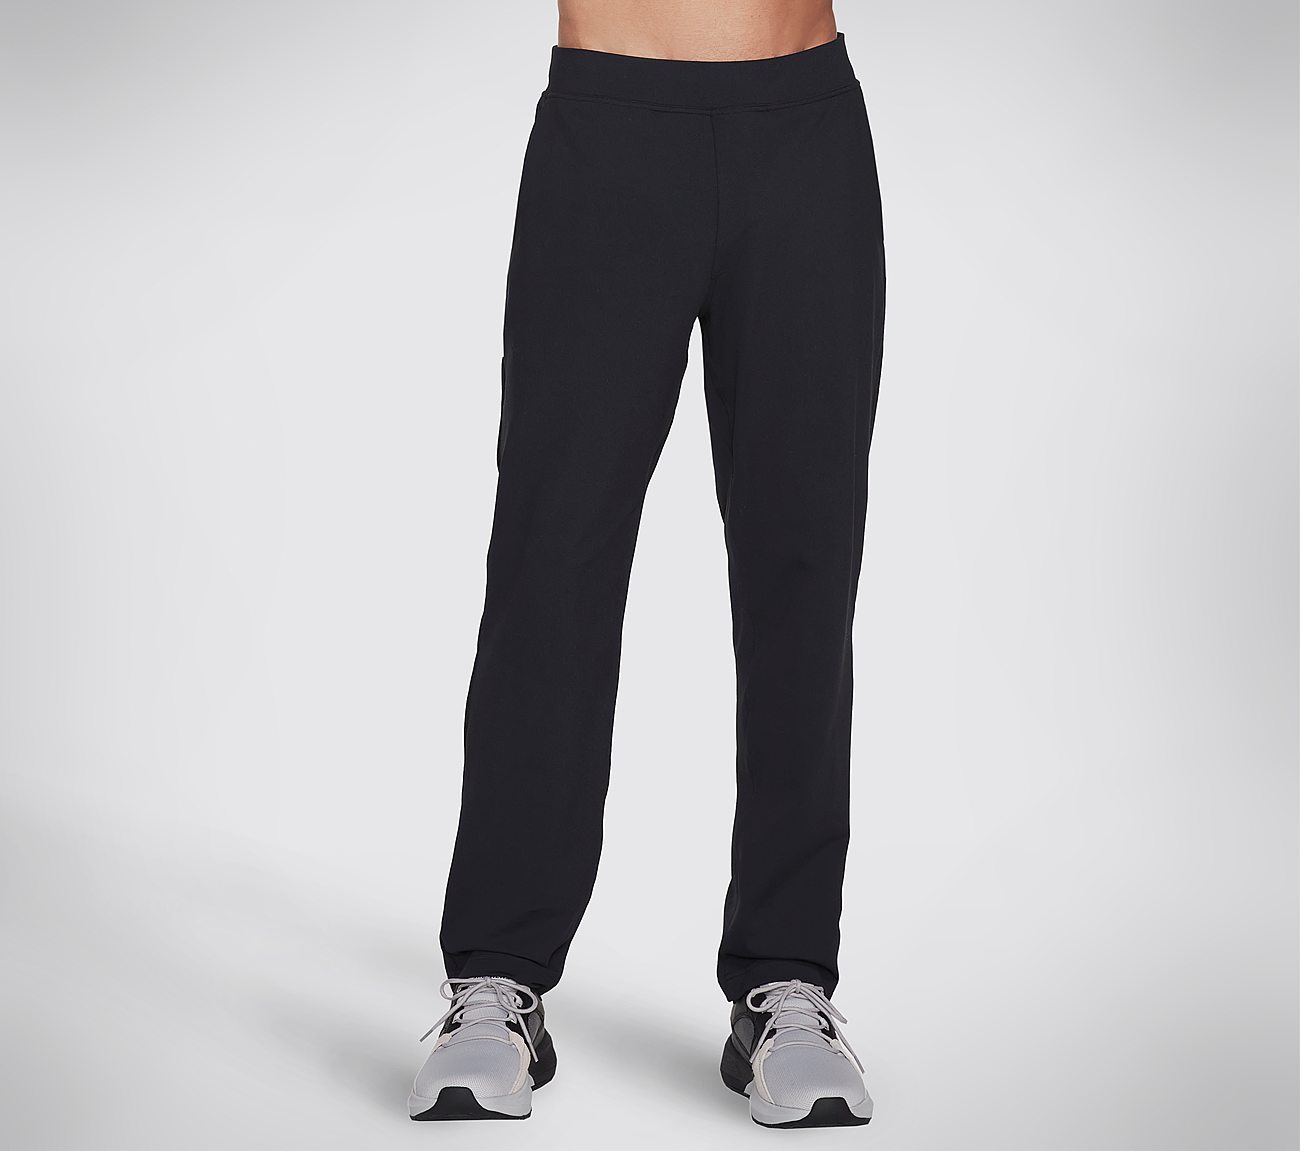 THE GOWALK PANT RECHARGE, BBBBLACK Apparels Lateral View